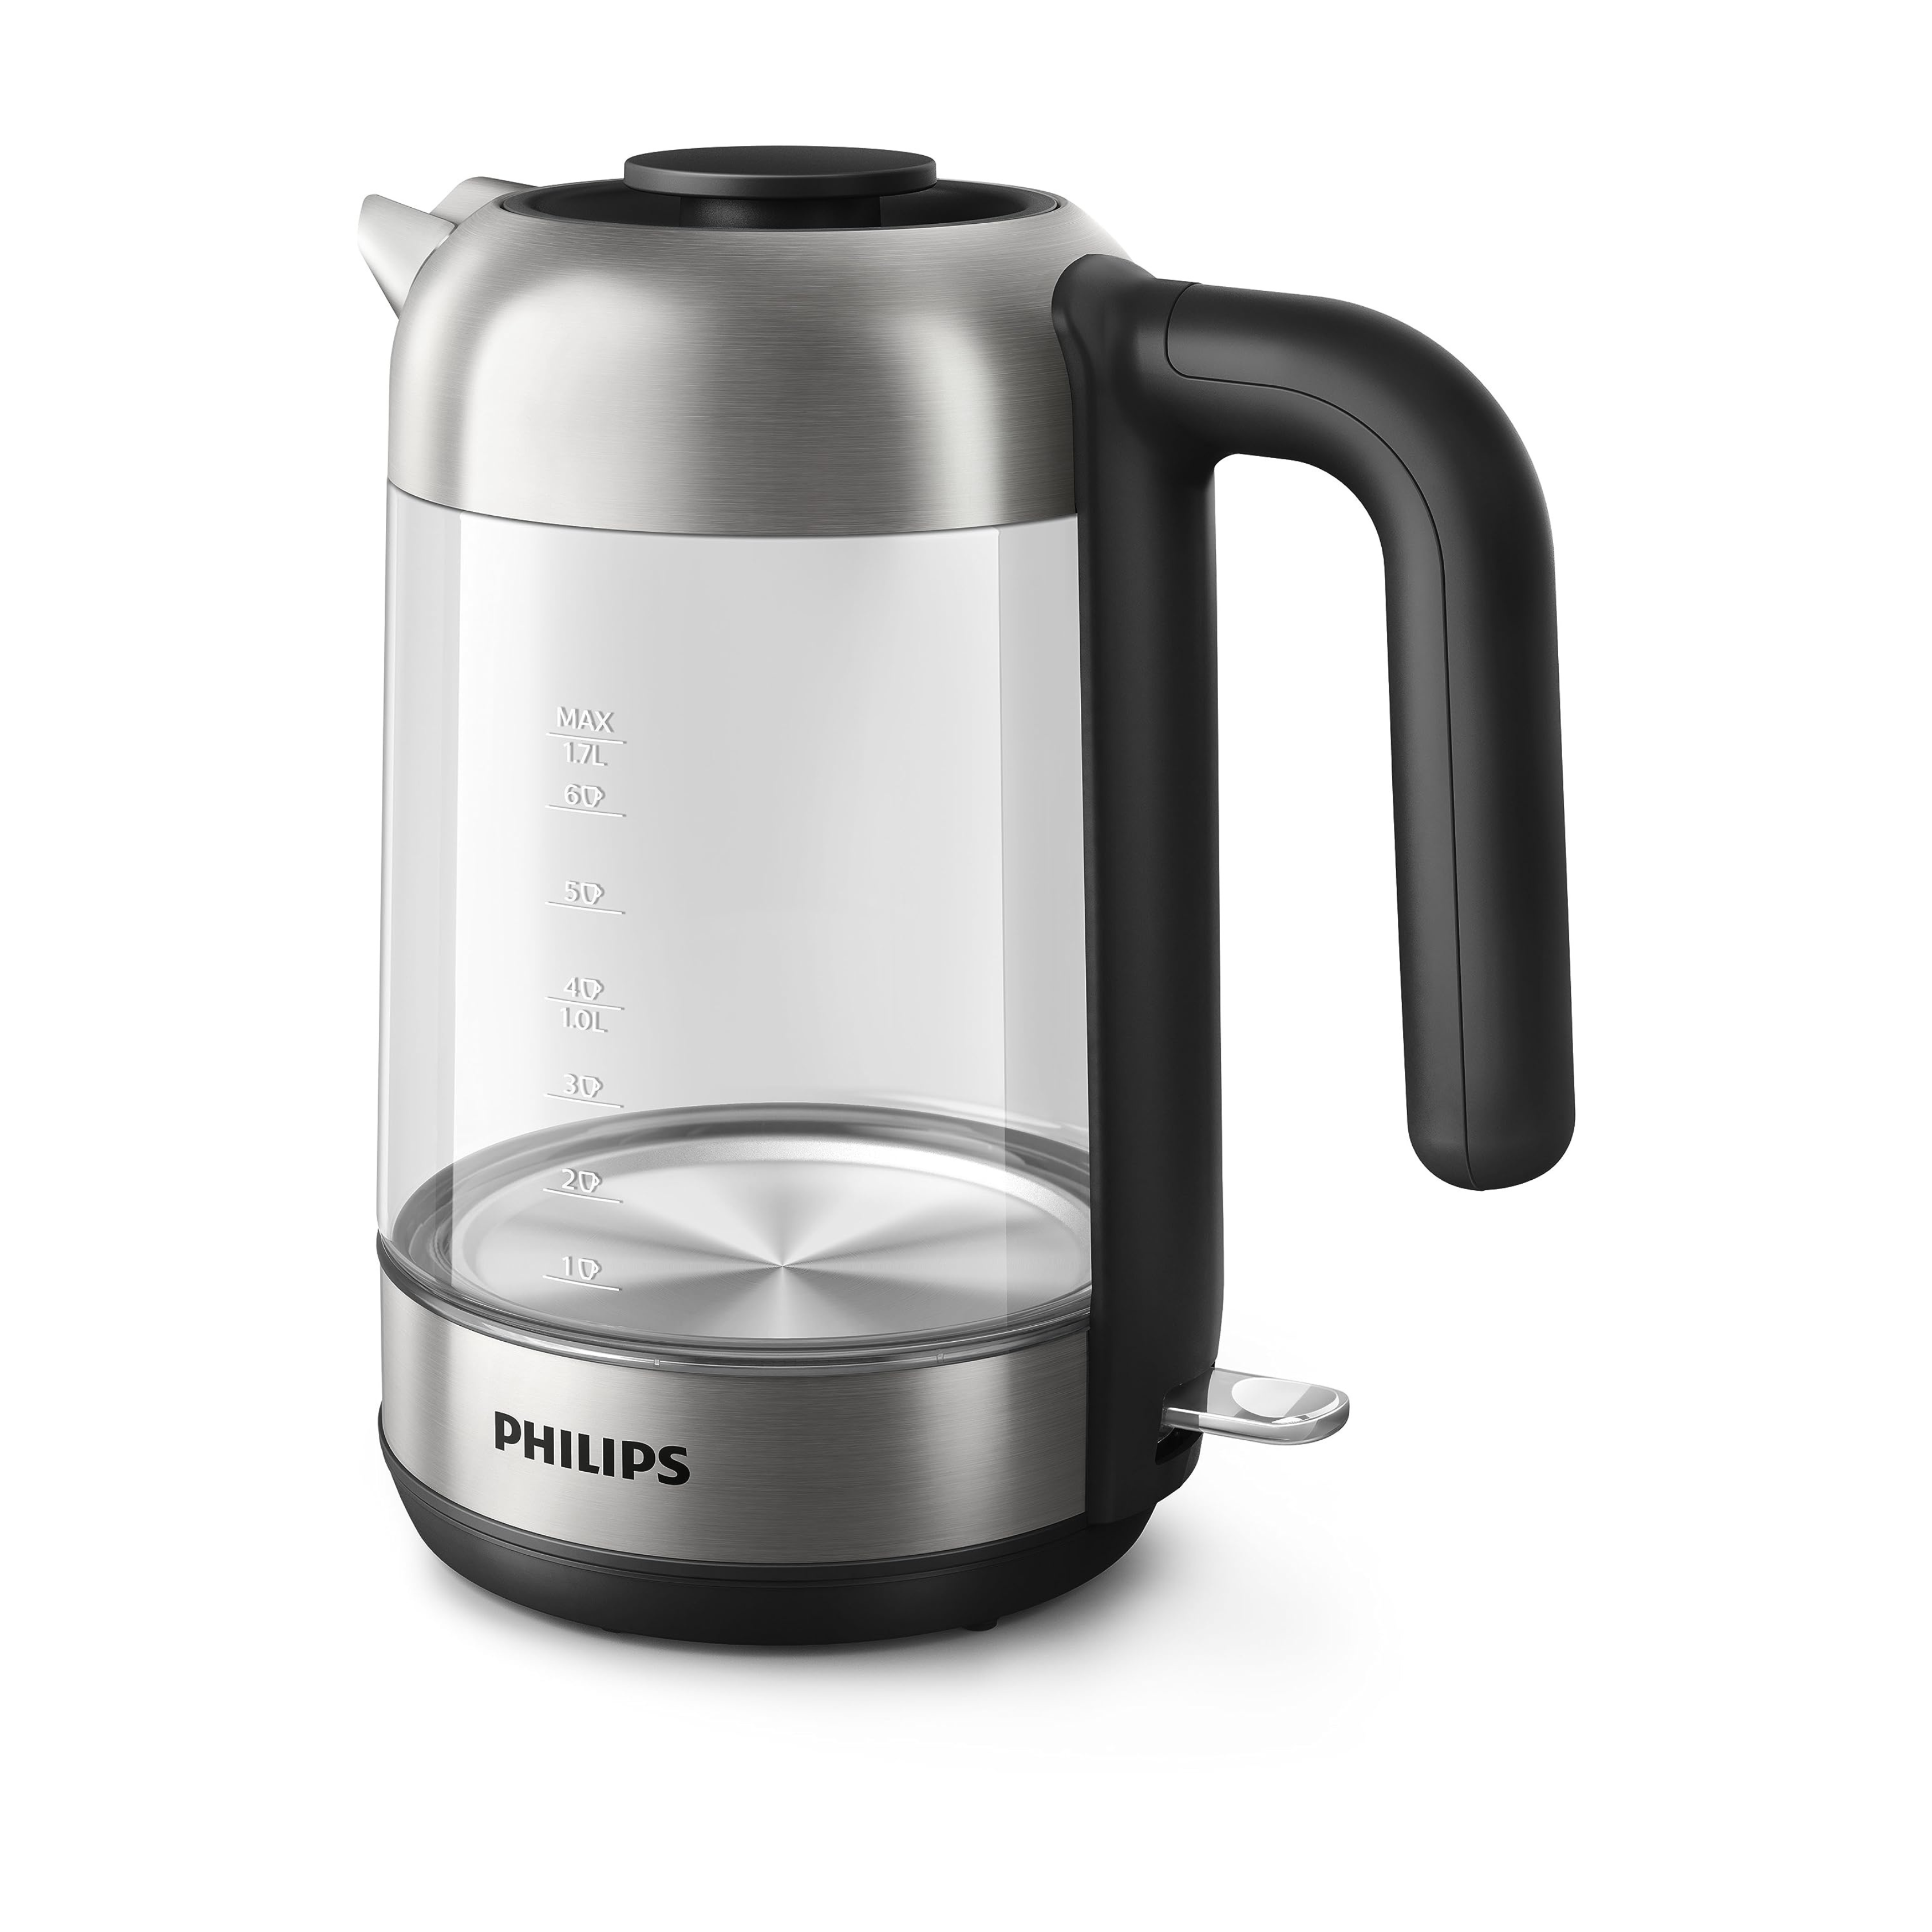 PHILIPS Electric Kettle 1.7 Litre - Glass - Frequency 50/60 Hz - HD9339/81